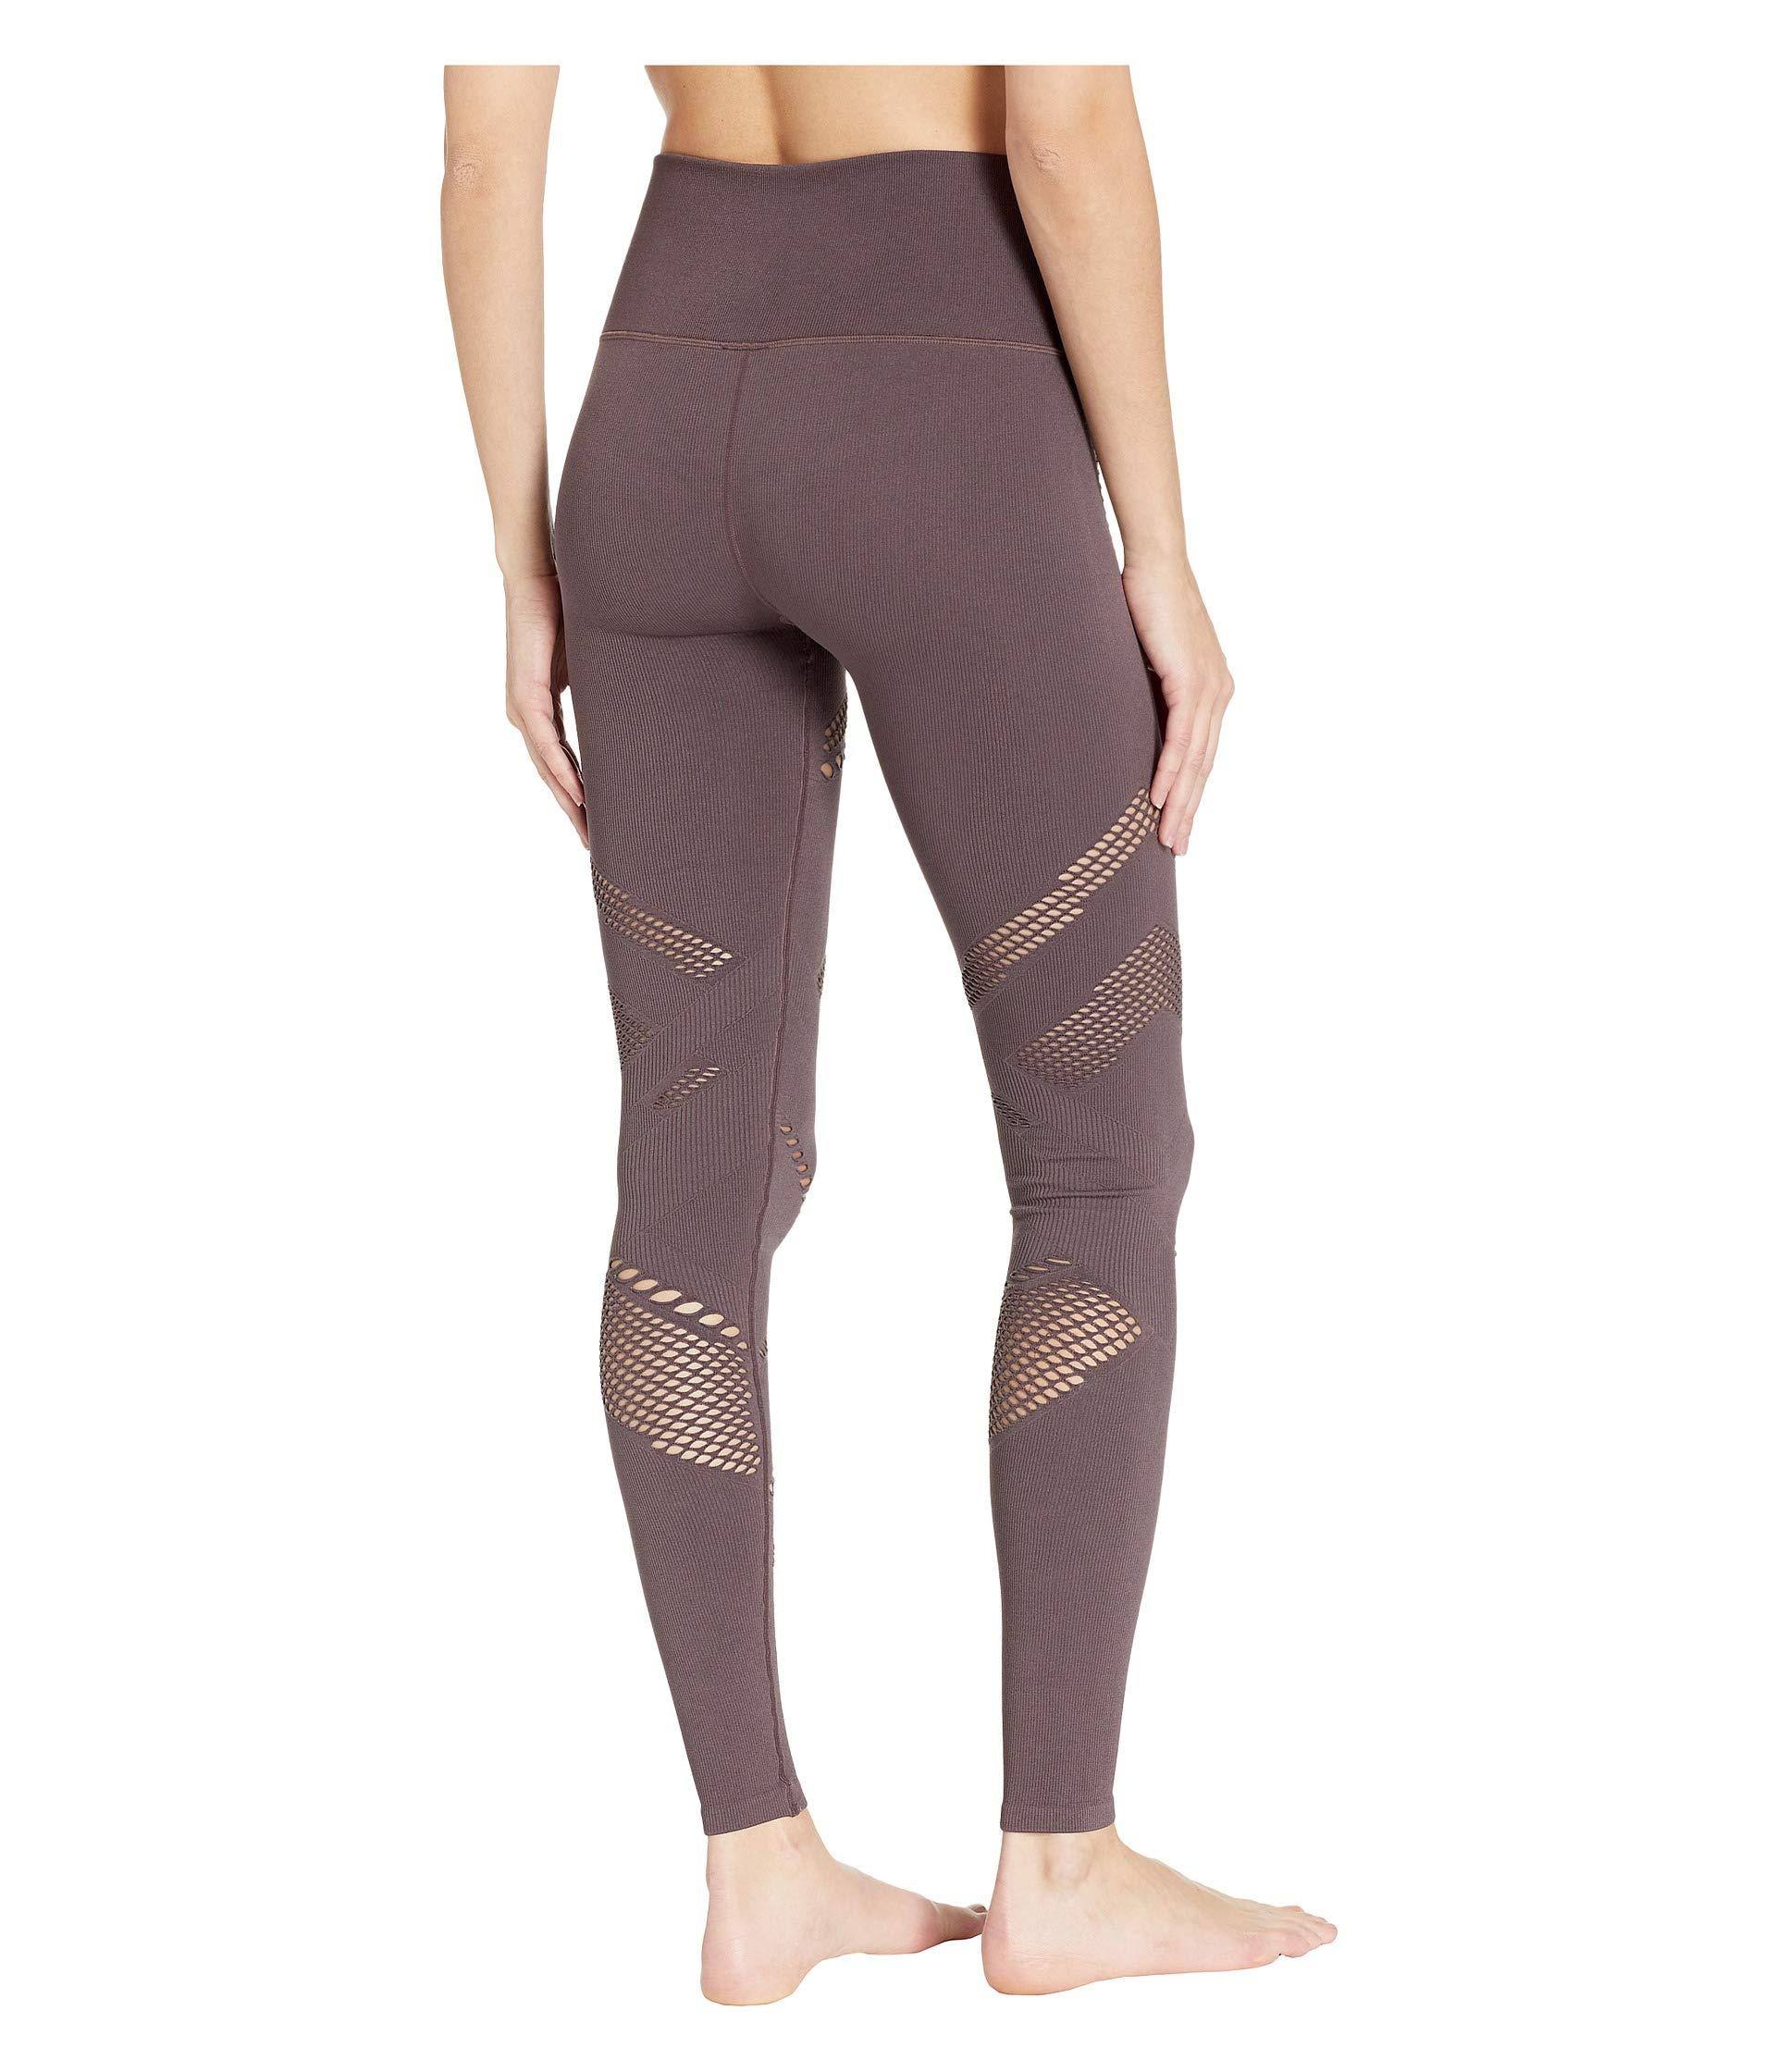 Alo Yoga Synthetic High-waist Seamless Radiance Leggings in Brown - Lyst